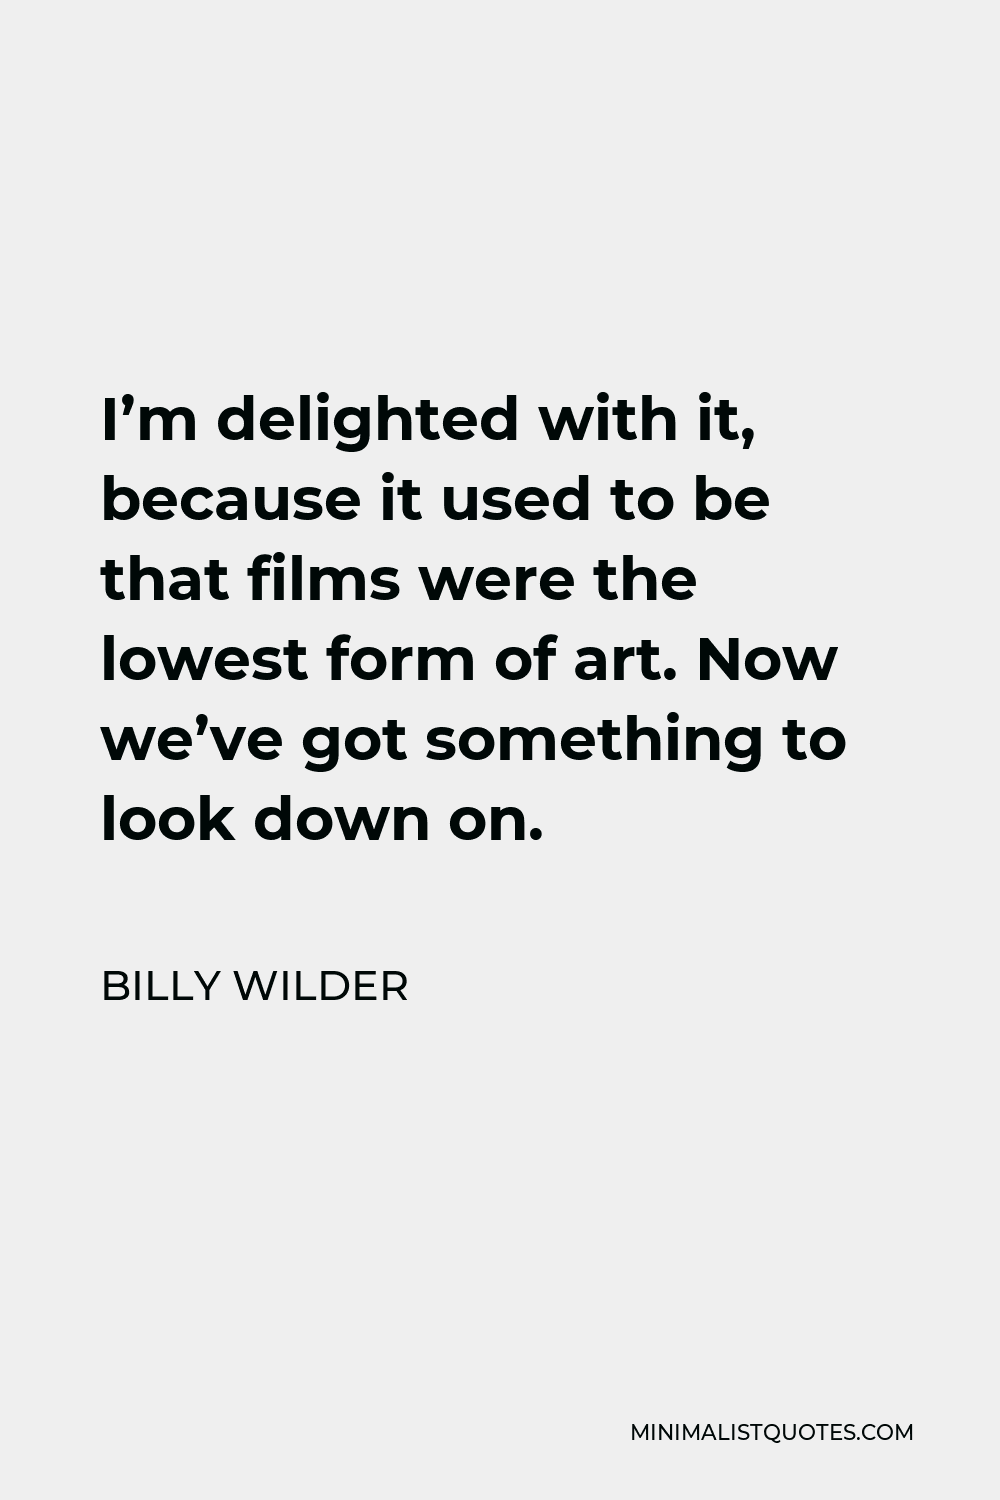 Billy Wilder Quote - I’m delighted with it, because it used to be that films were the lowest form of art. Now we’ve got something to look down on.